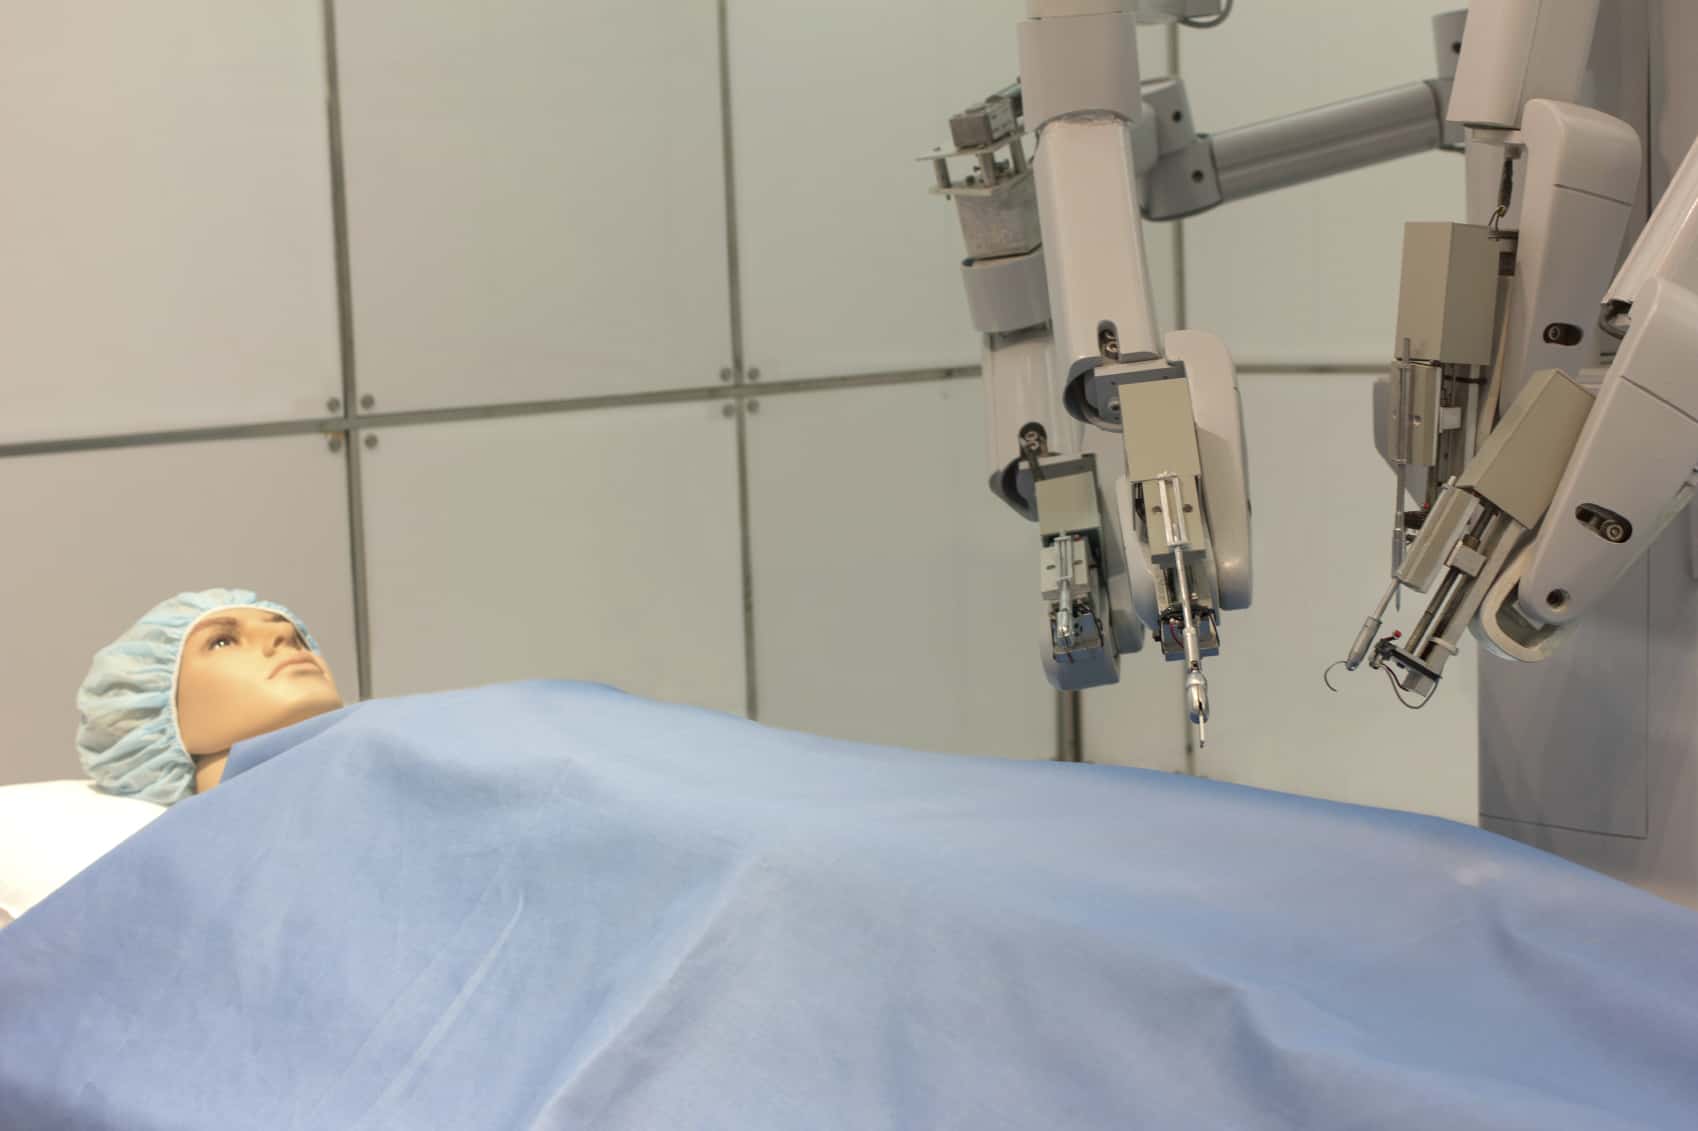 Dangers related to robotic surgery